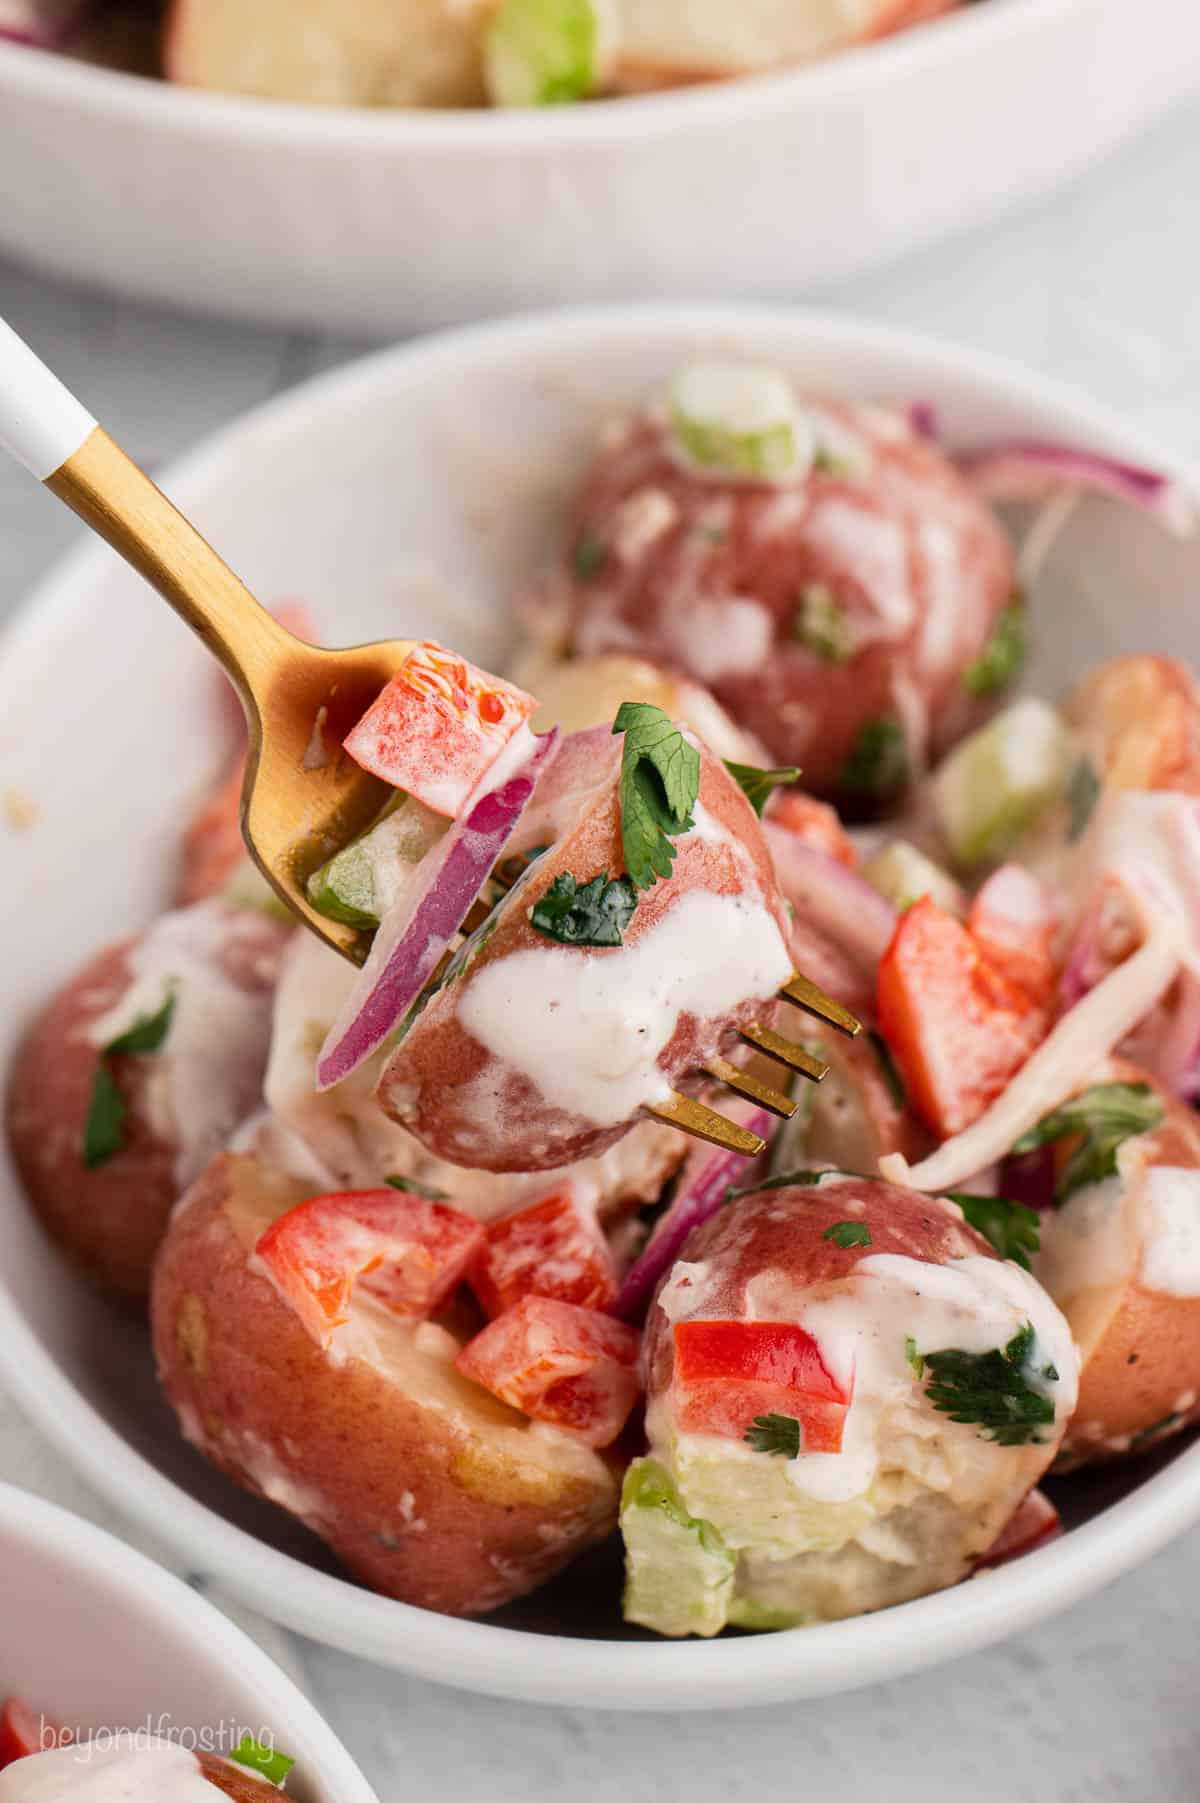 A fork in a bowl of red potato salad